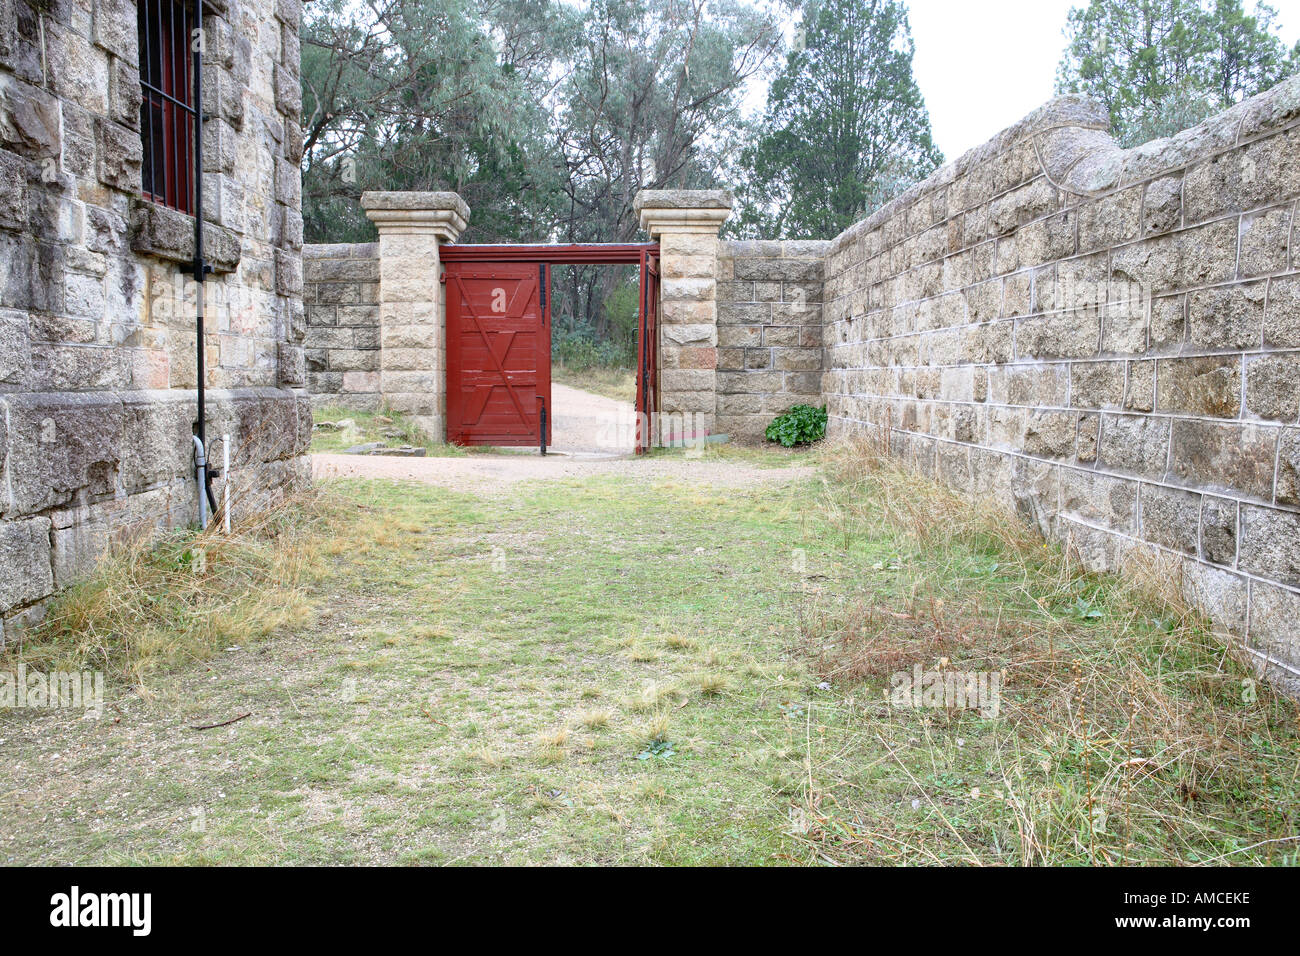 Historic Powder Magazine courtyard built in 1859 during the Victorian gold rush days Beechworth North East Victoria Australia Stock Photo